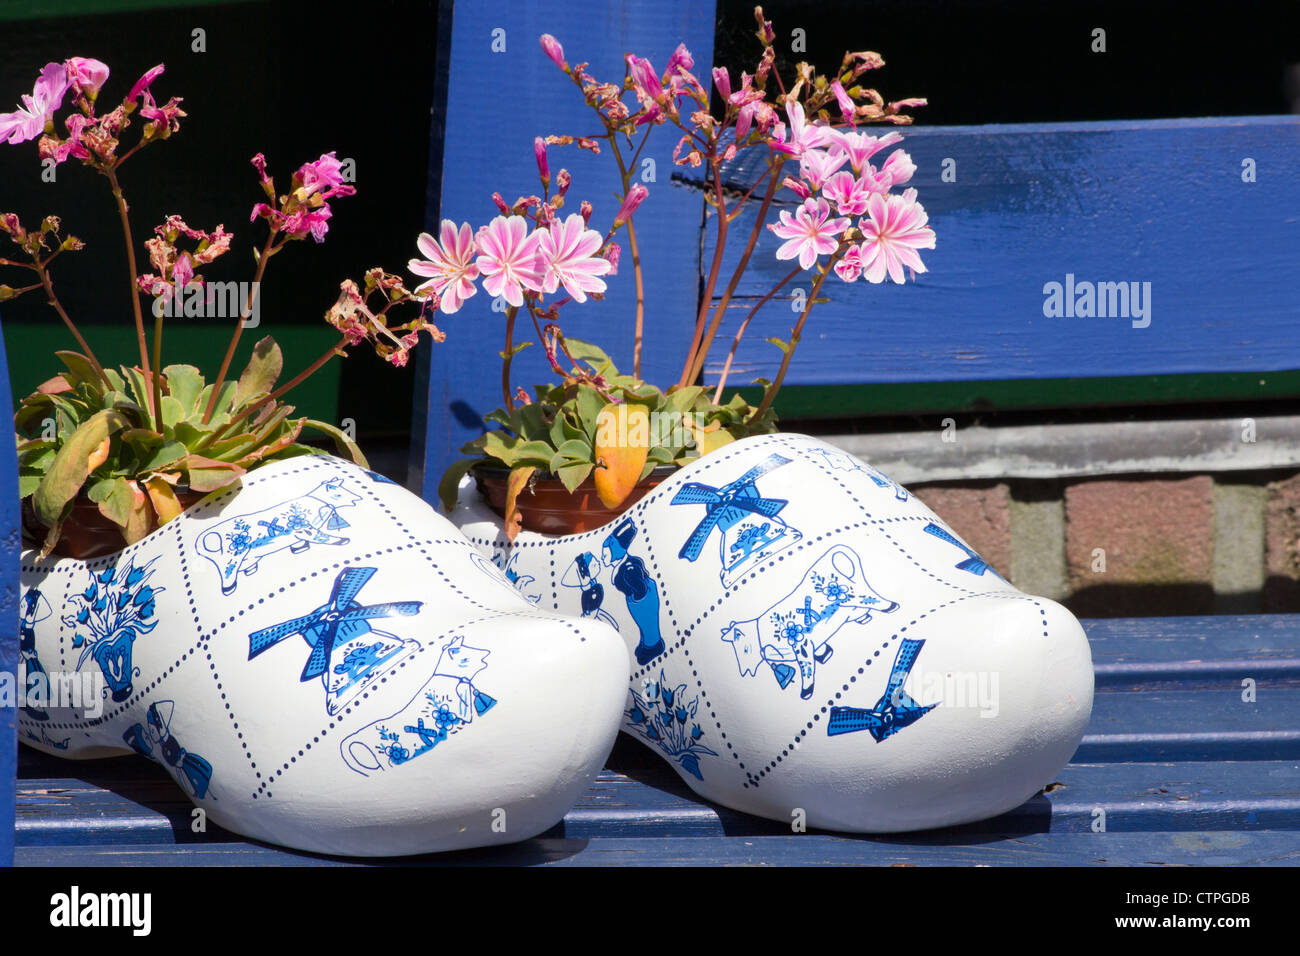 Dutch clogs decorated in the touristic town of Marken, The Netherlands Stock Photo